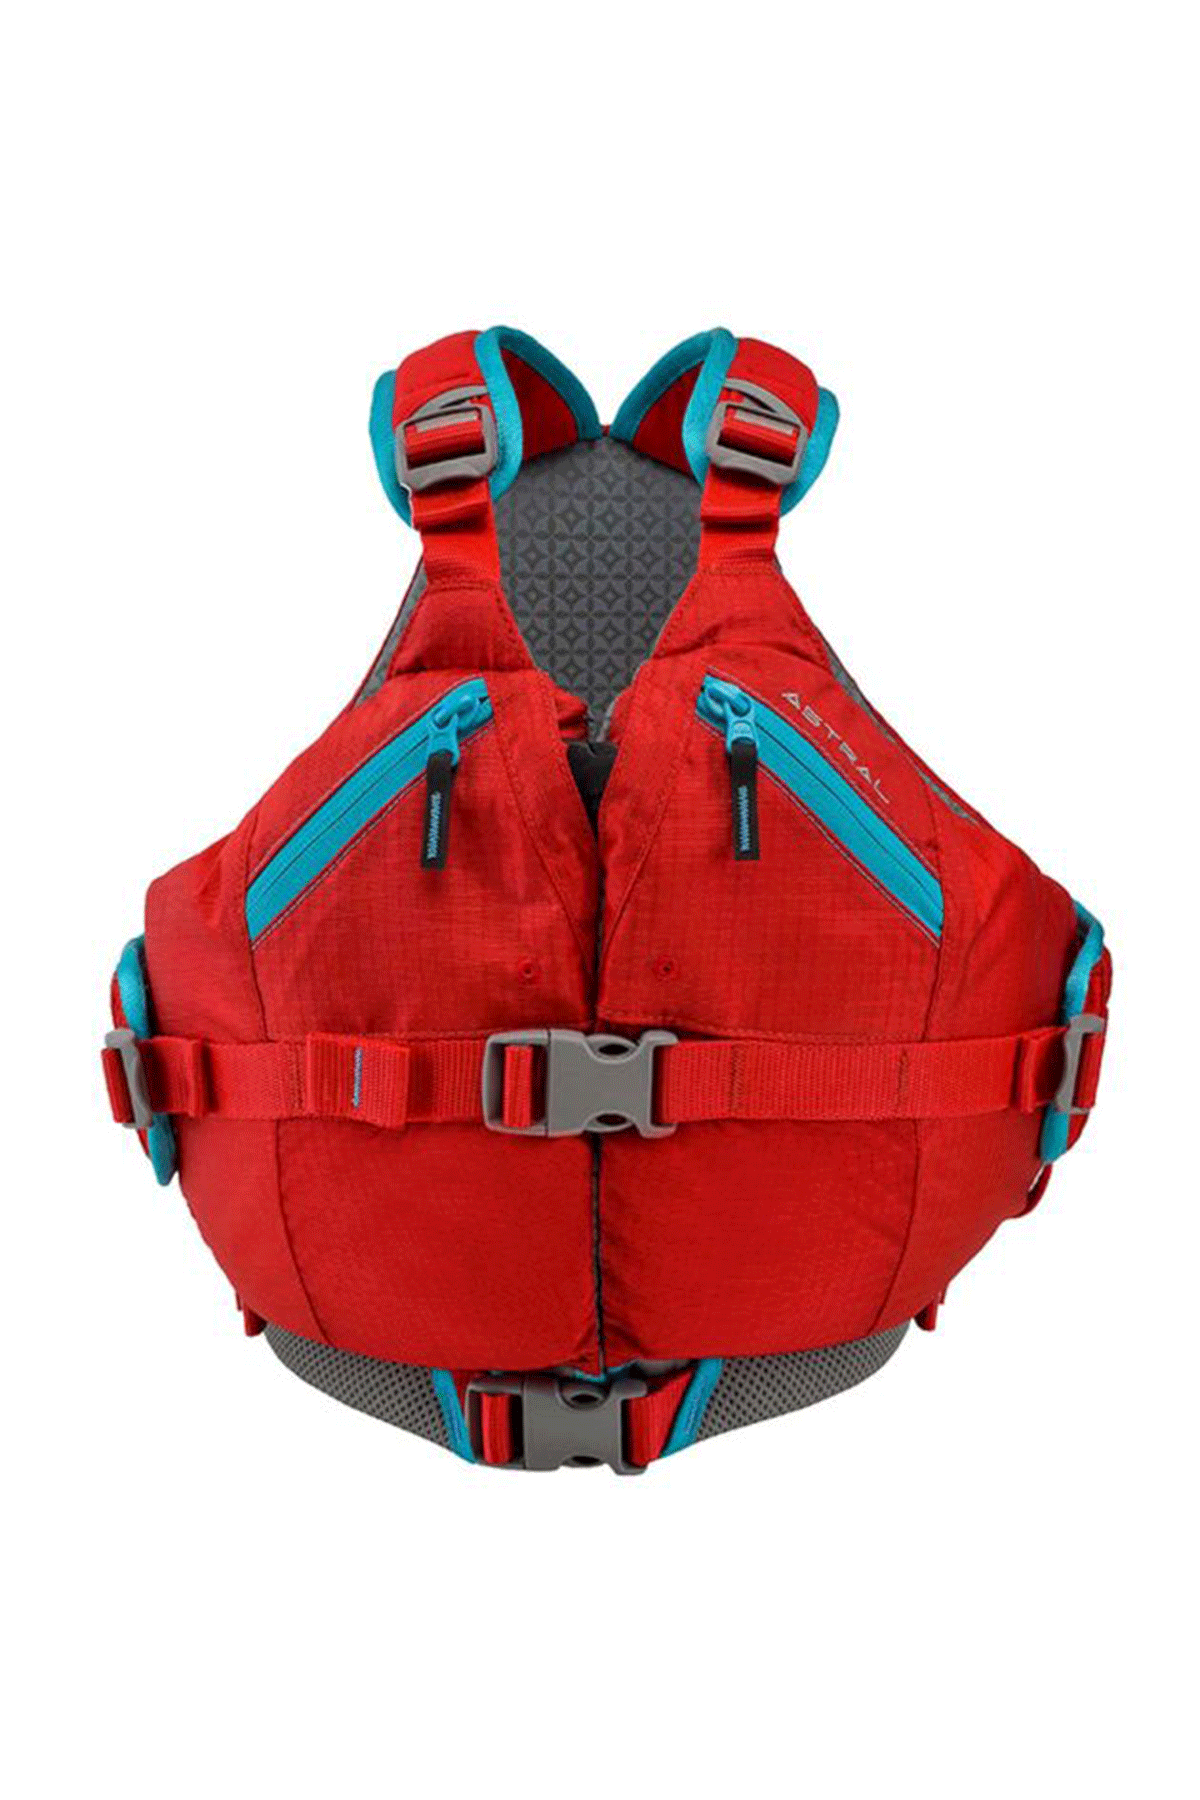 Otter 2.0 Astral Youth PFD Red